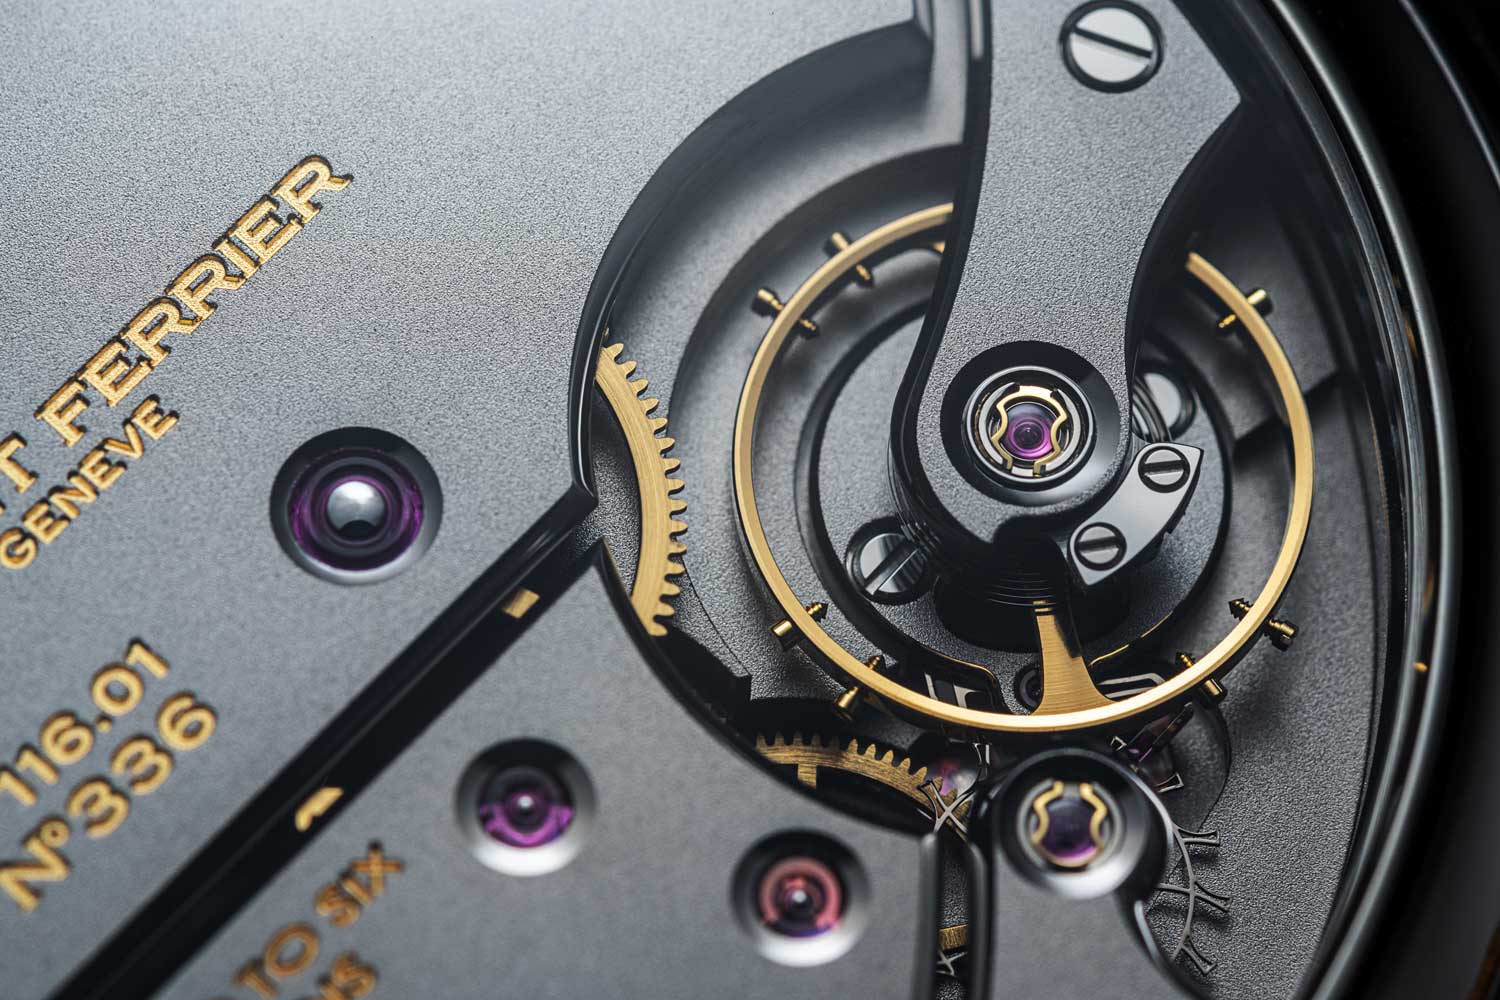 A closer look at the finishing. Note the skeletonized escapement fabricated using LIGA